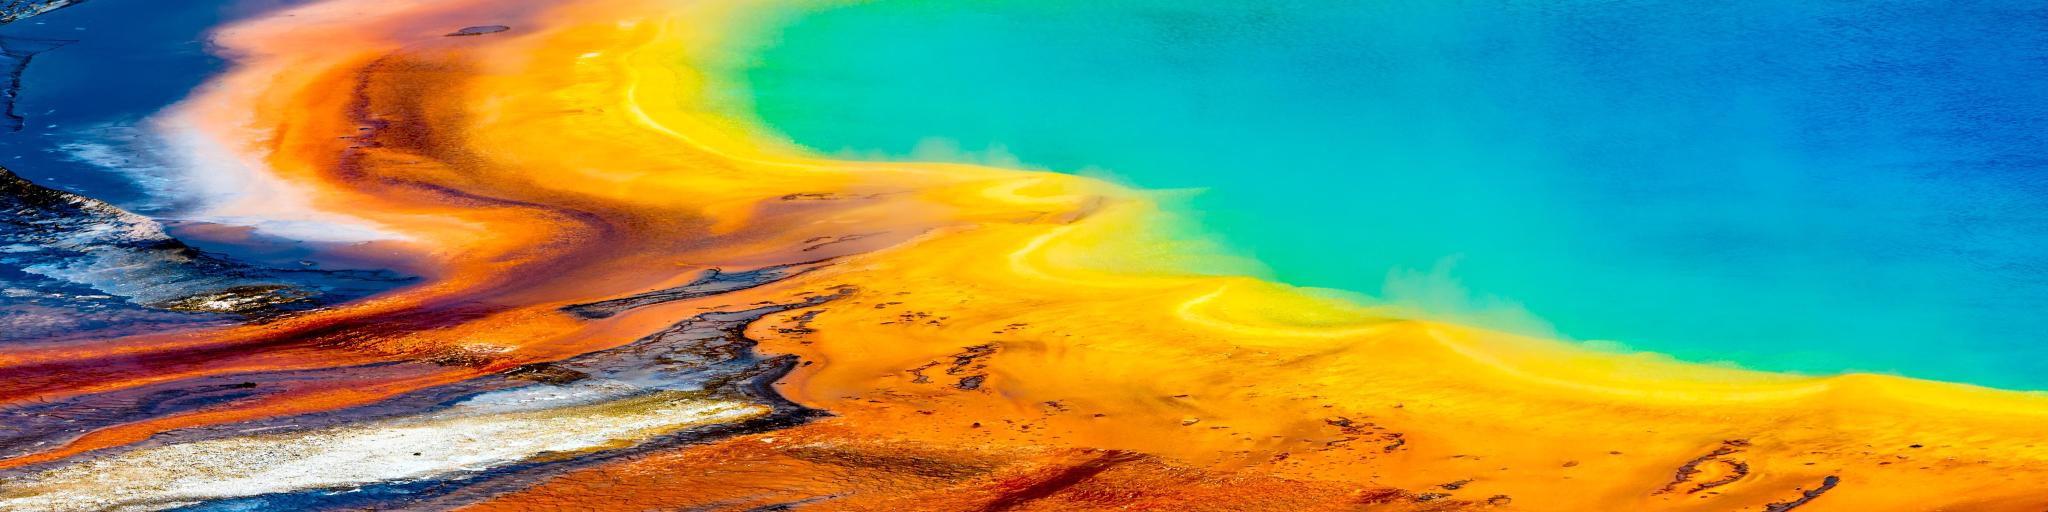 Yellowstone National Park, Wyoming, USA with a closeup view of the Grand Prismatic Spring.